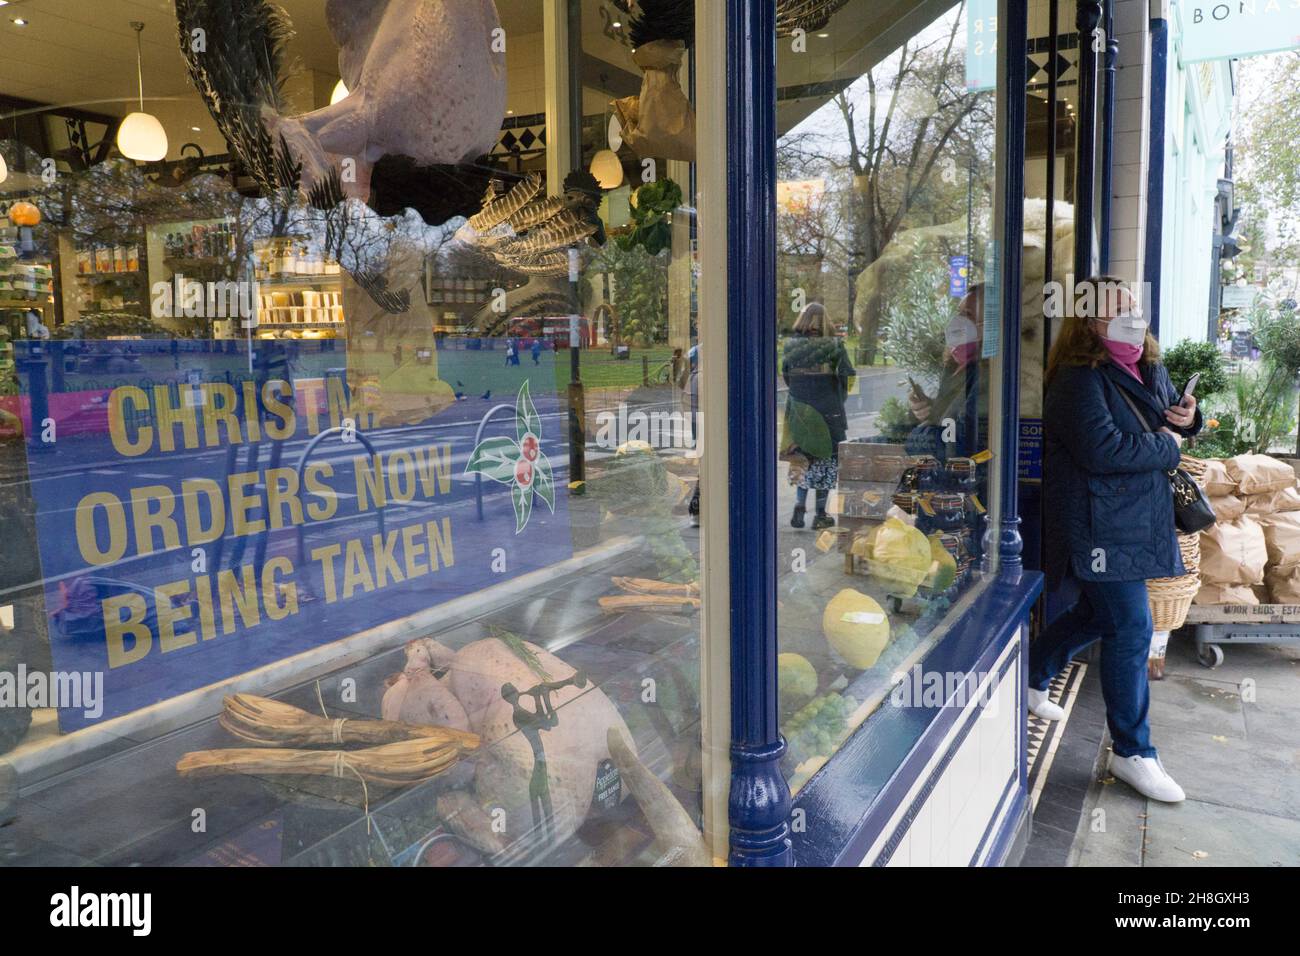 London, UK, 30 November 2021: In Clapham shoppers are now obliged by law to wear a face mask in shops or on public transport. At the upmarket butchers M. Moen & Son, opposite Clapham Common, a festive display announces they are taking orders for Christmas. Anna Watson/Alamy Live News Stock Photo